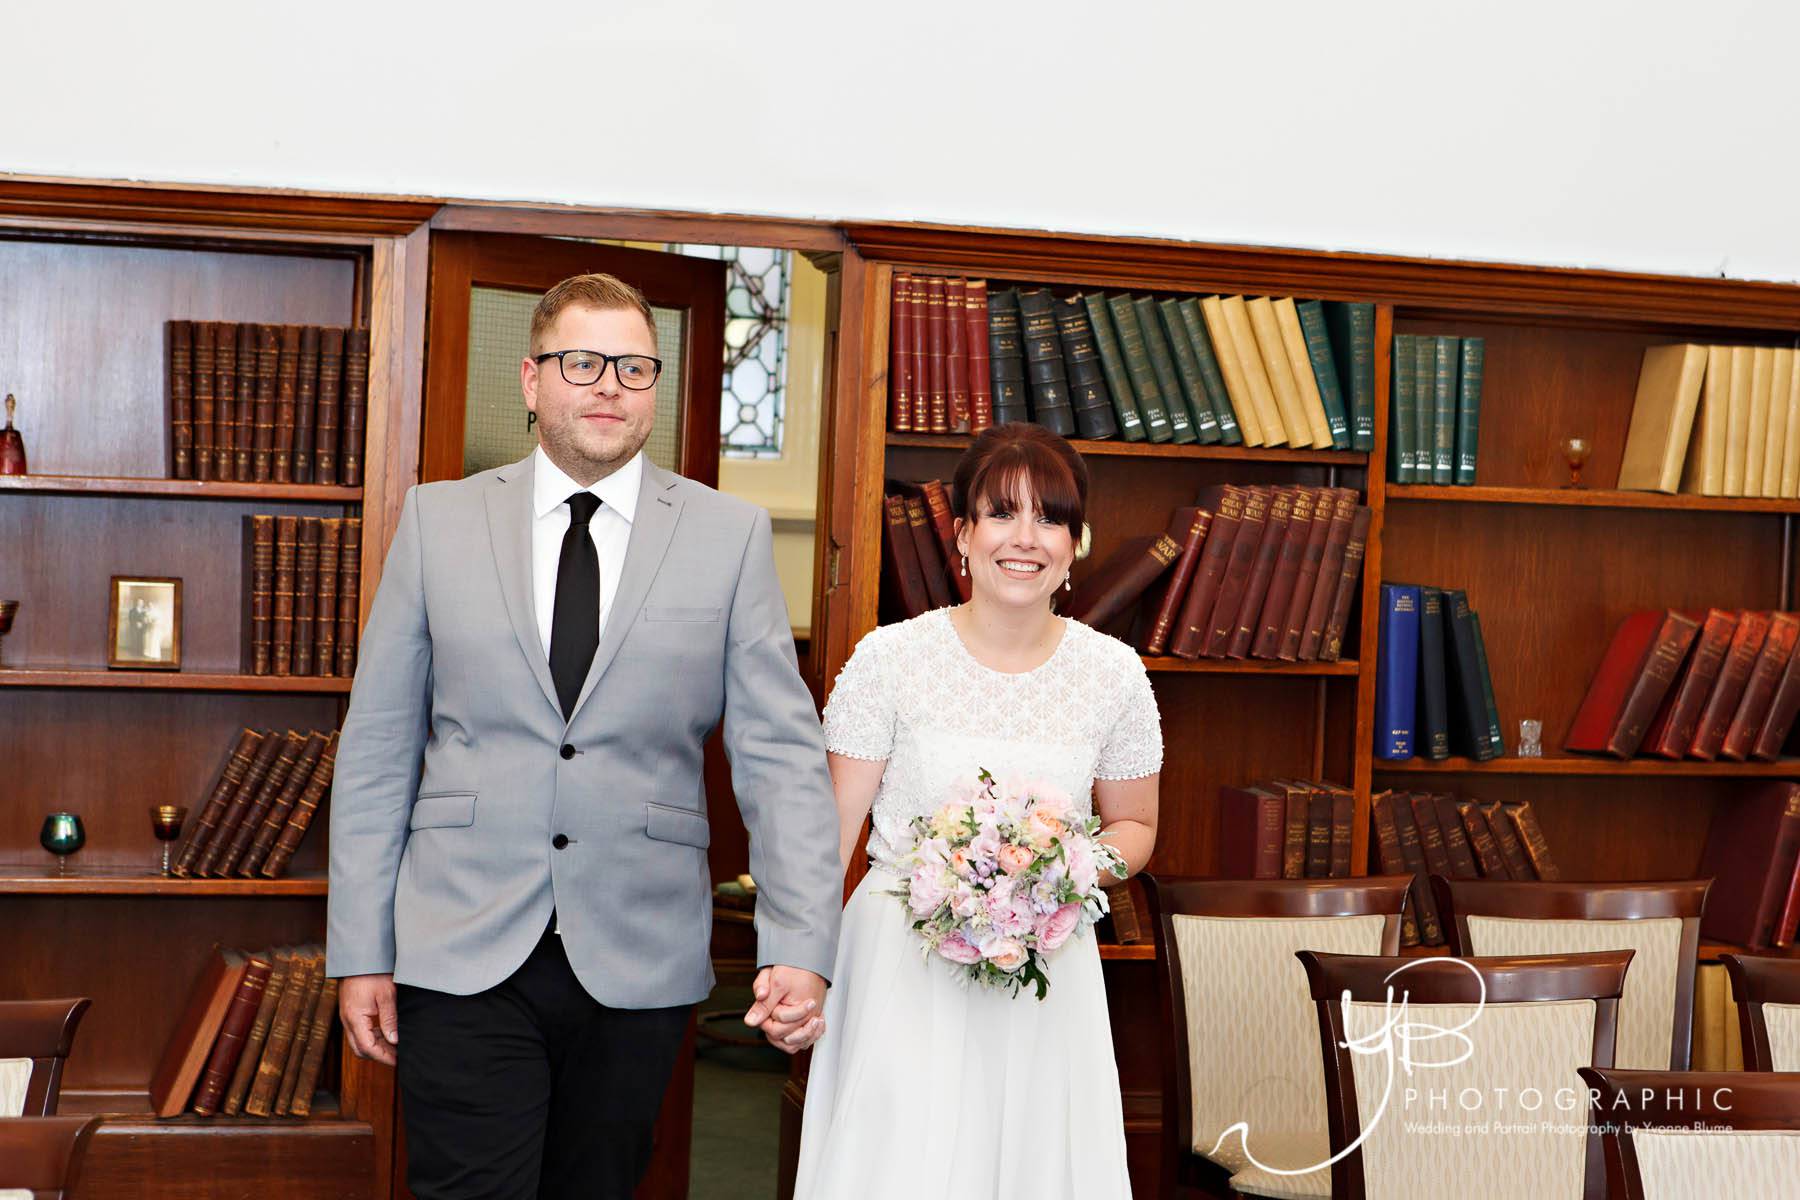 Elopement at Mayfair Library